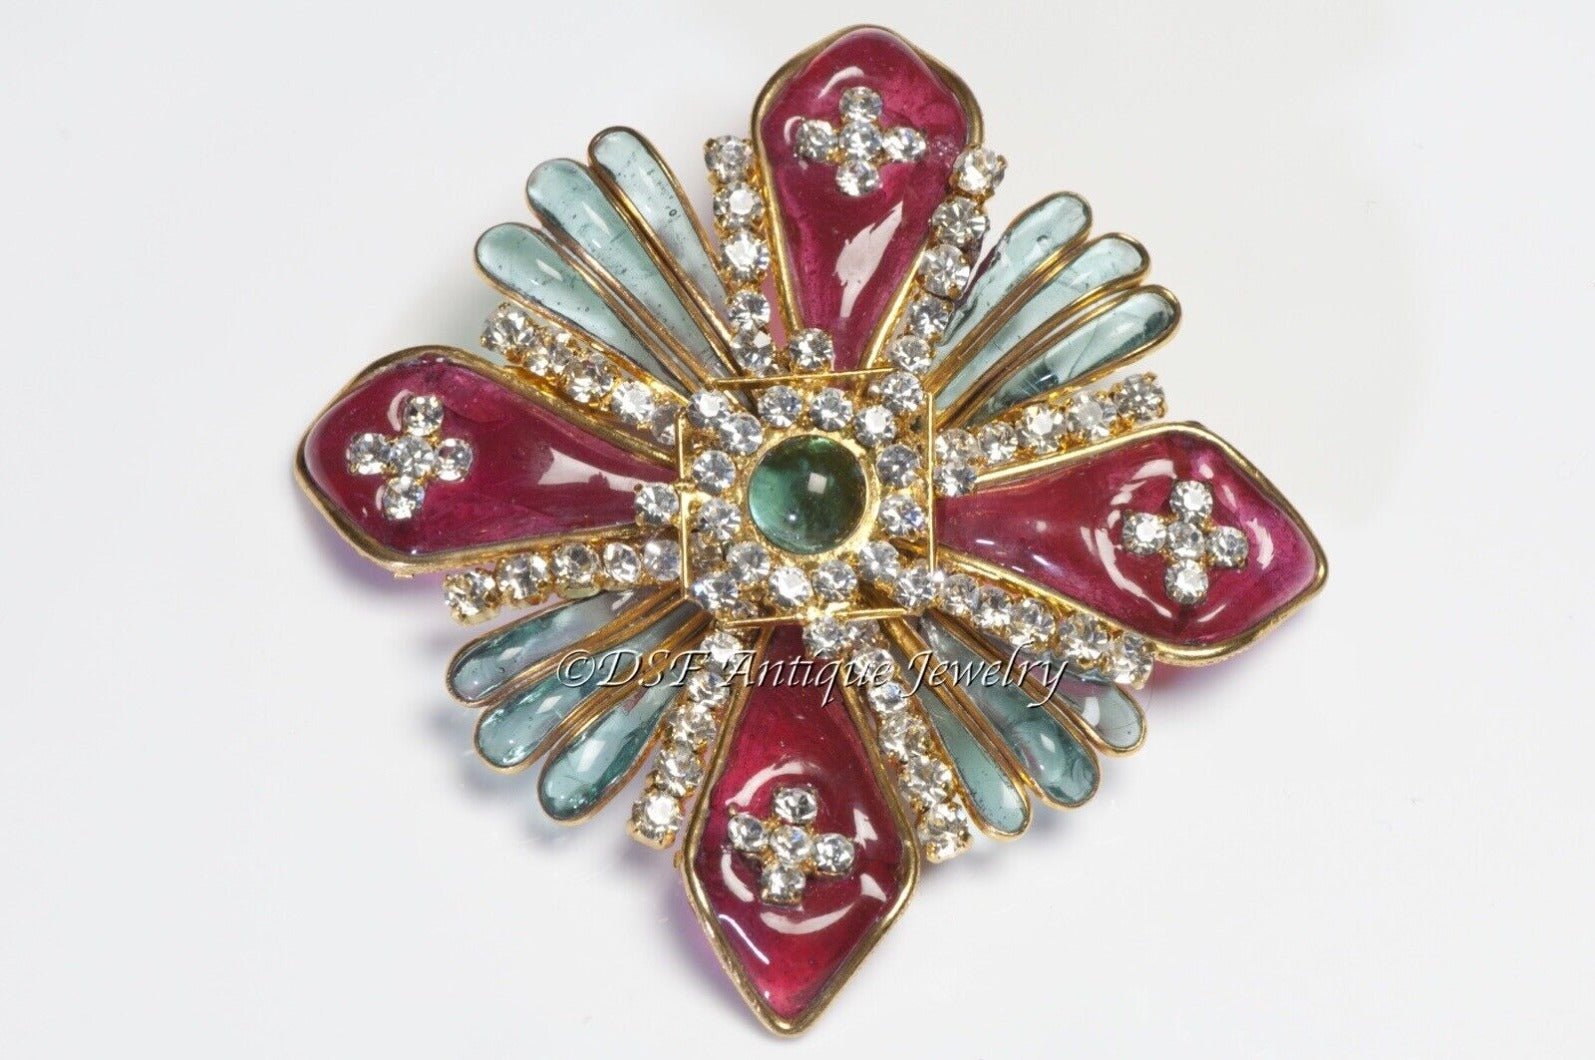 CHANEL Paris Maison Gripoix Red Blue Glass Crystal Cross Flower Brooch - DSF Antique Jewelry